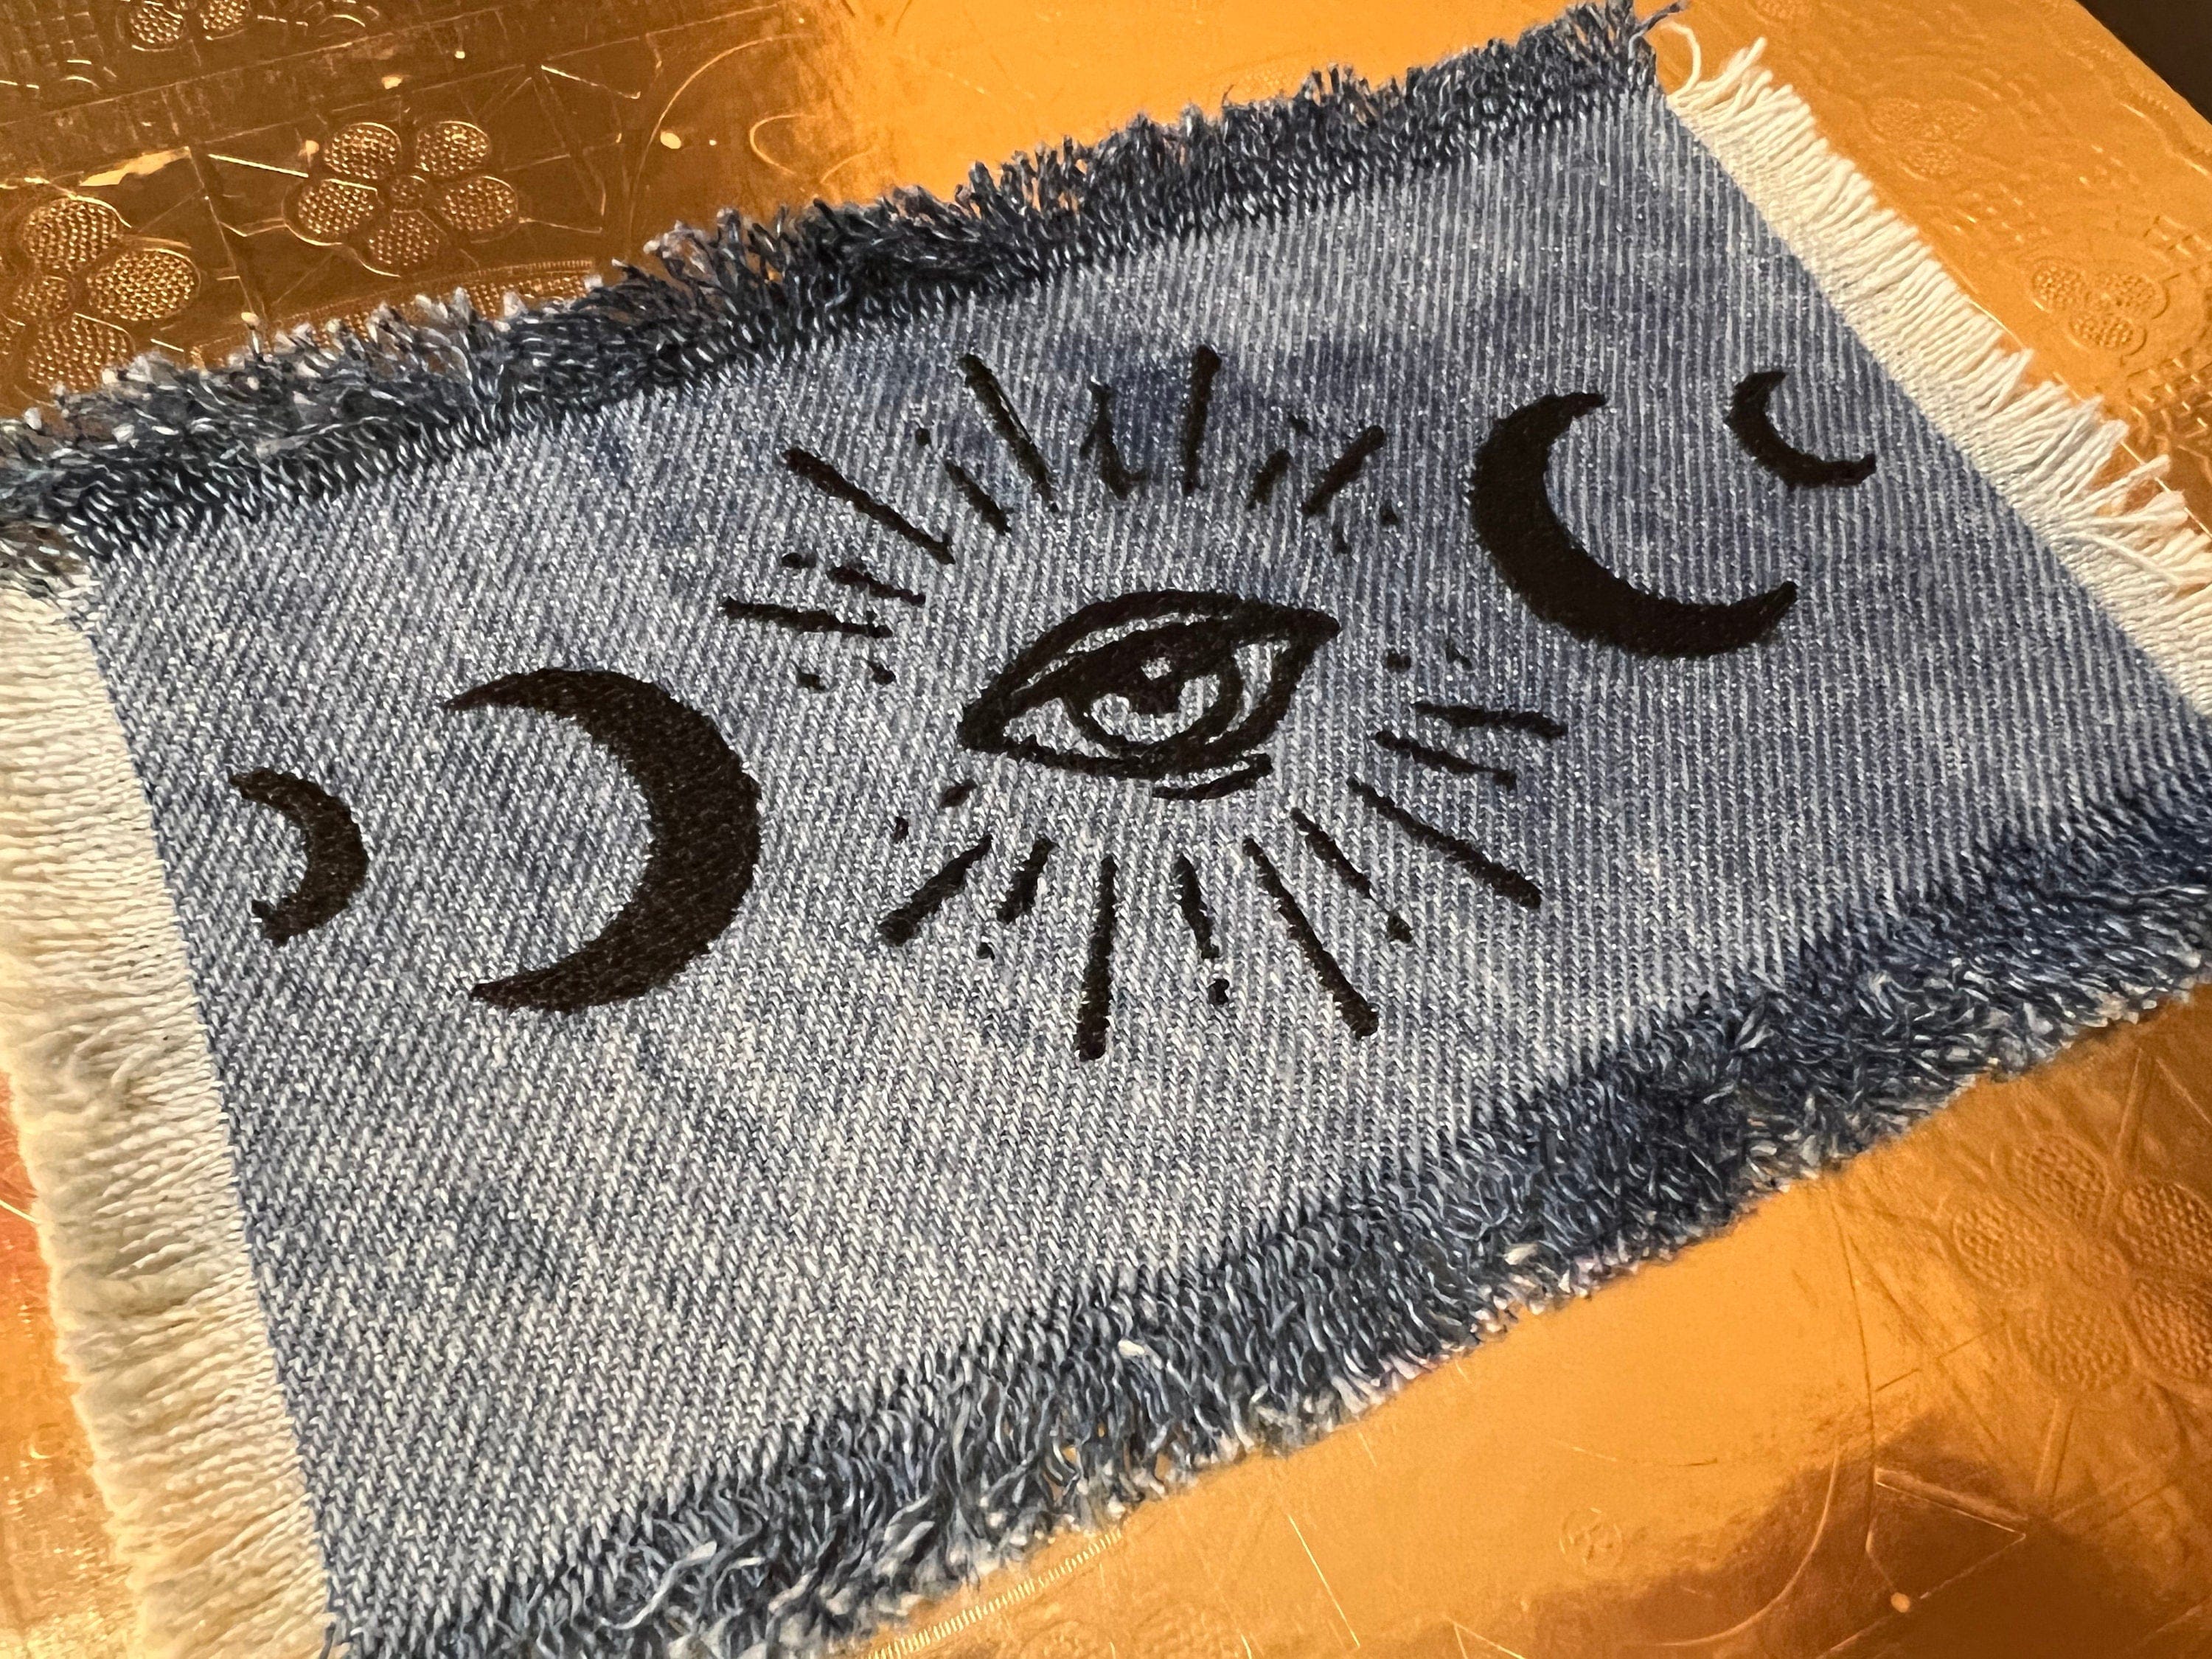 Crescent MOON Eye SOULE PATCH art Bleached blue Denim Iron On patch Sun Eye embroidered patchwork ironons patches sewn moons Sol decal Appliques & Patches